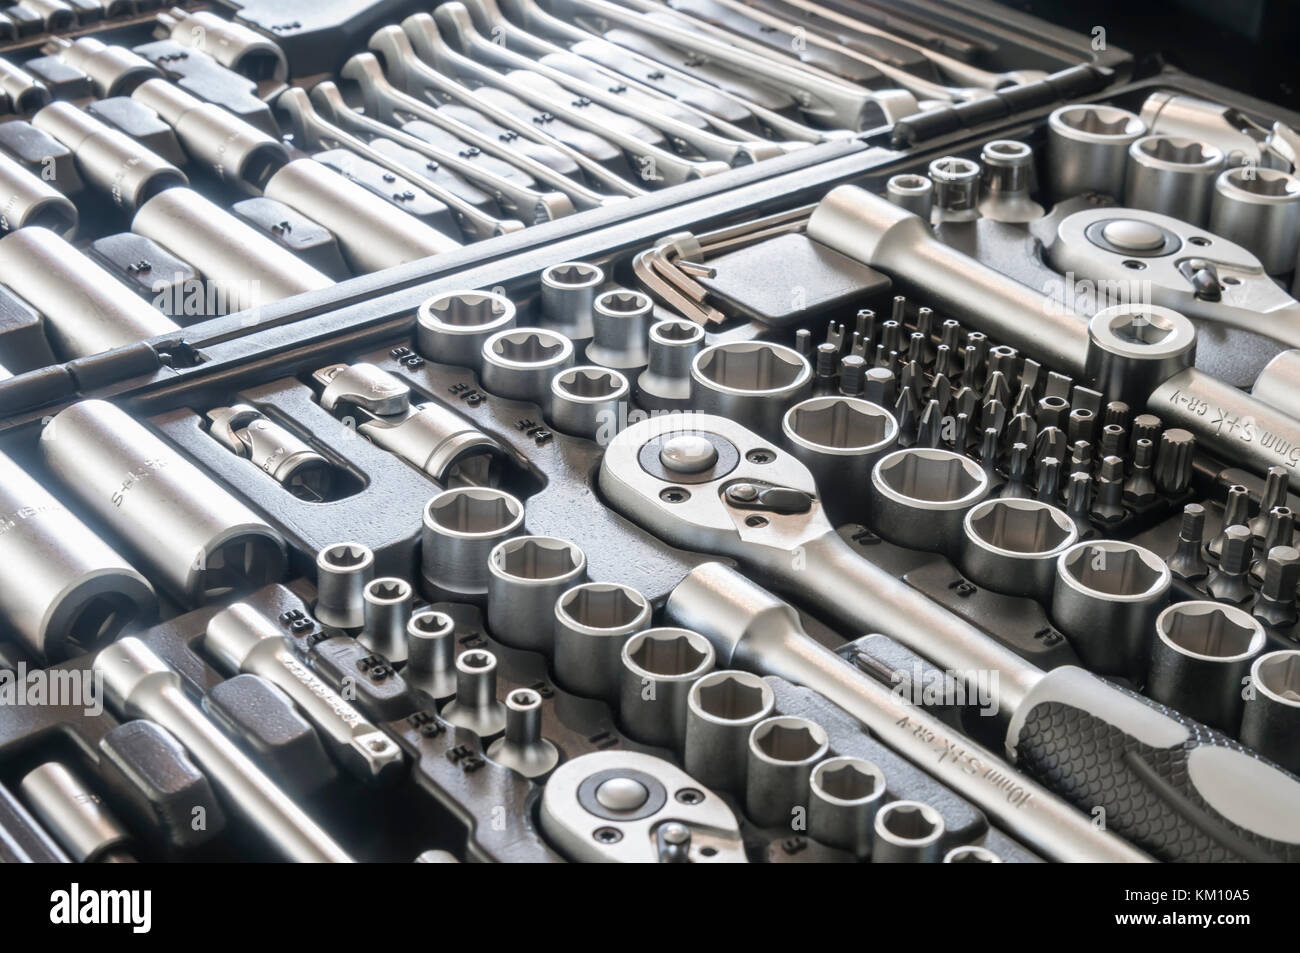 Sockets, tools, wrenches, spanners and bits in a chrome vanadium socket set  Stock Photo - Alamy